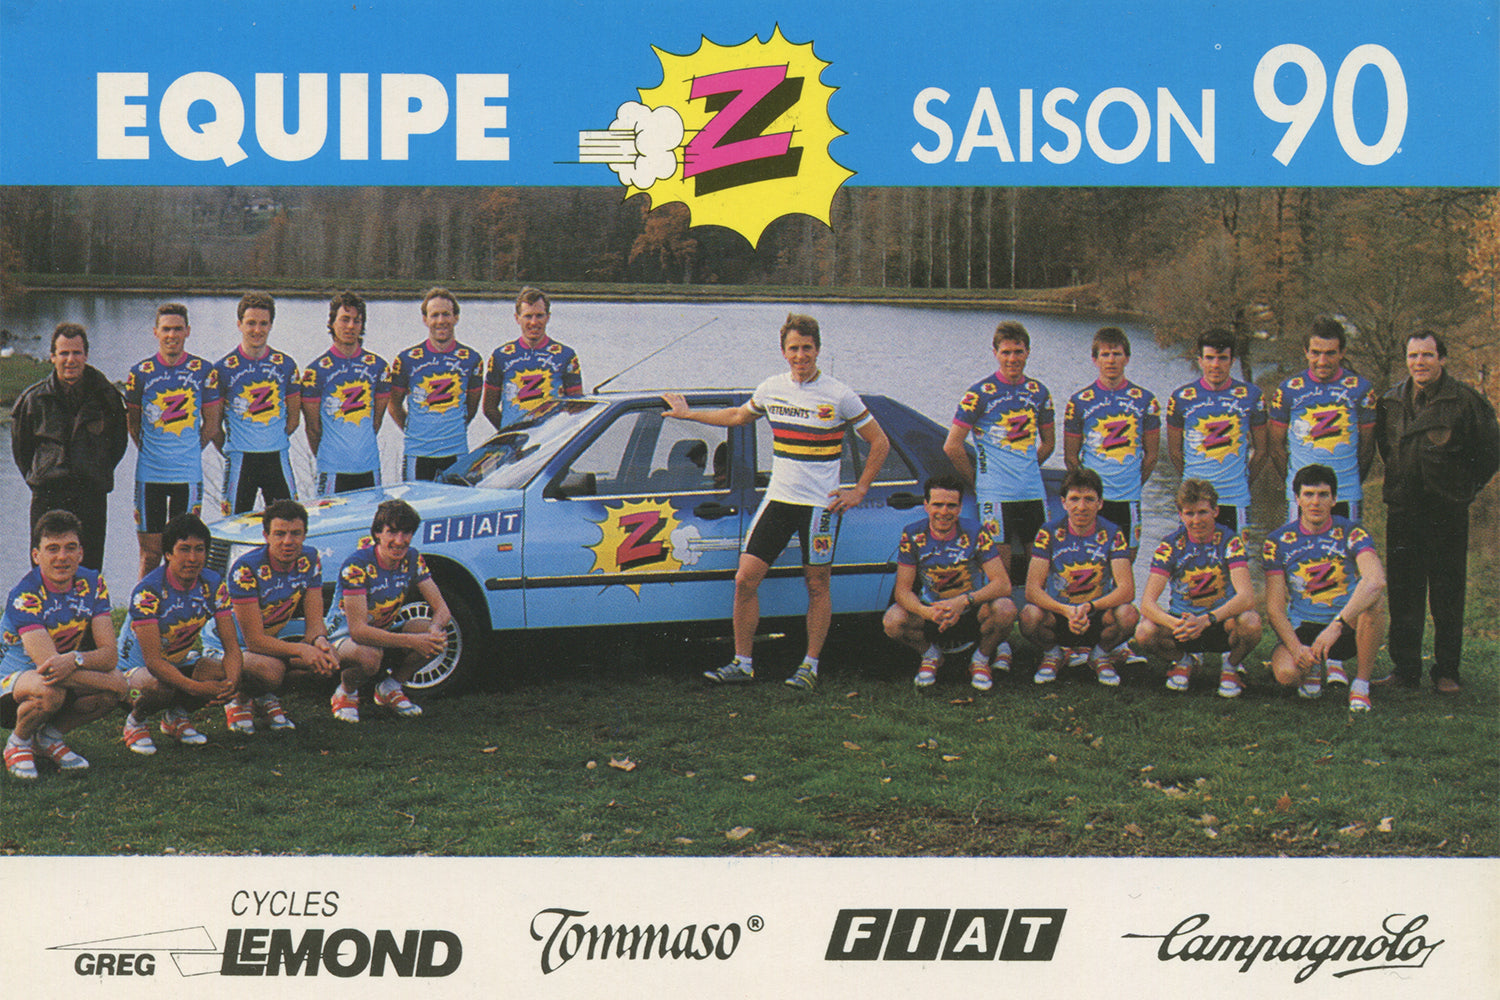 Equipe Vêtements Z-Peugeot Cycling Team postcard from 1990 with world champion Greg Lemond in the centre in his rainbow jersey.